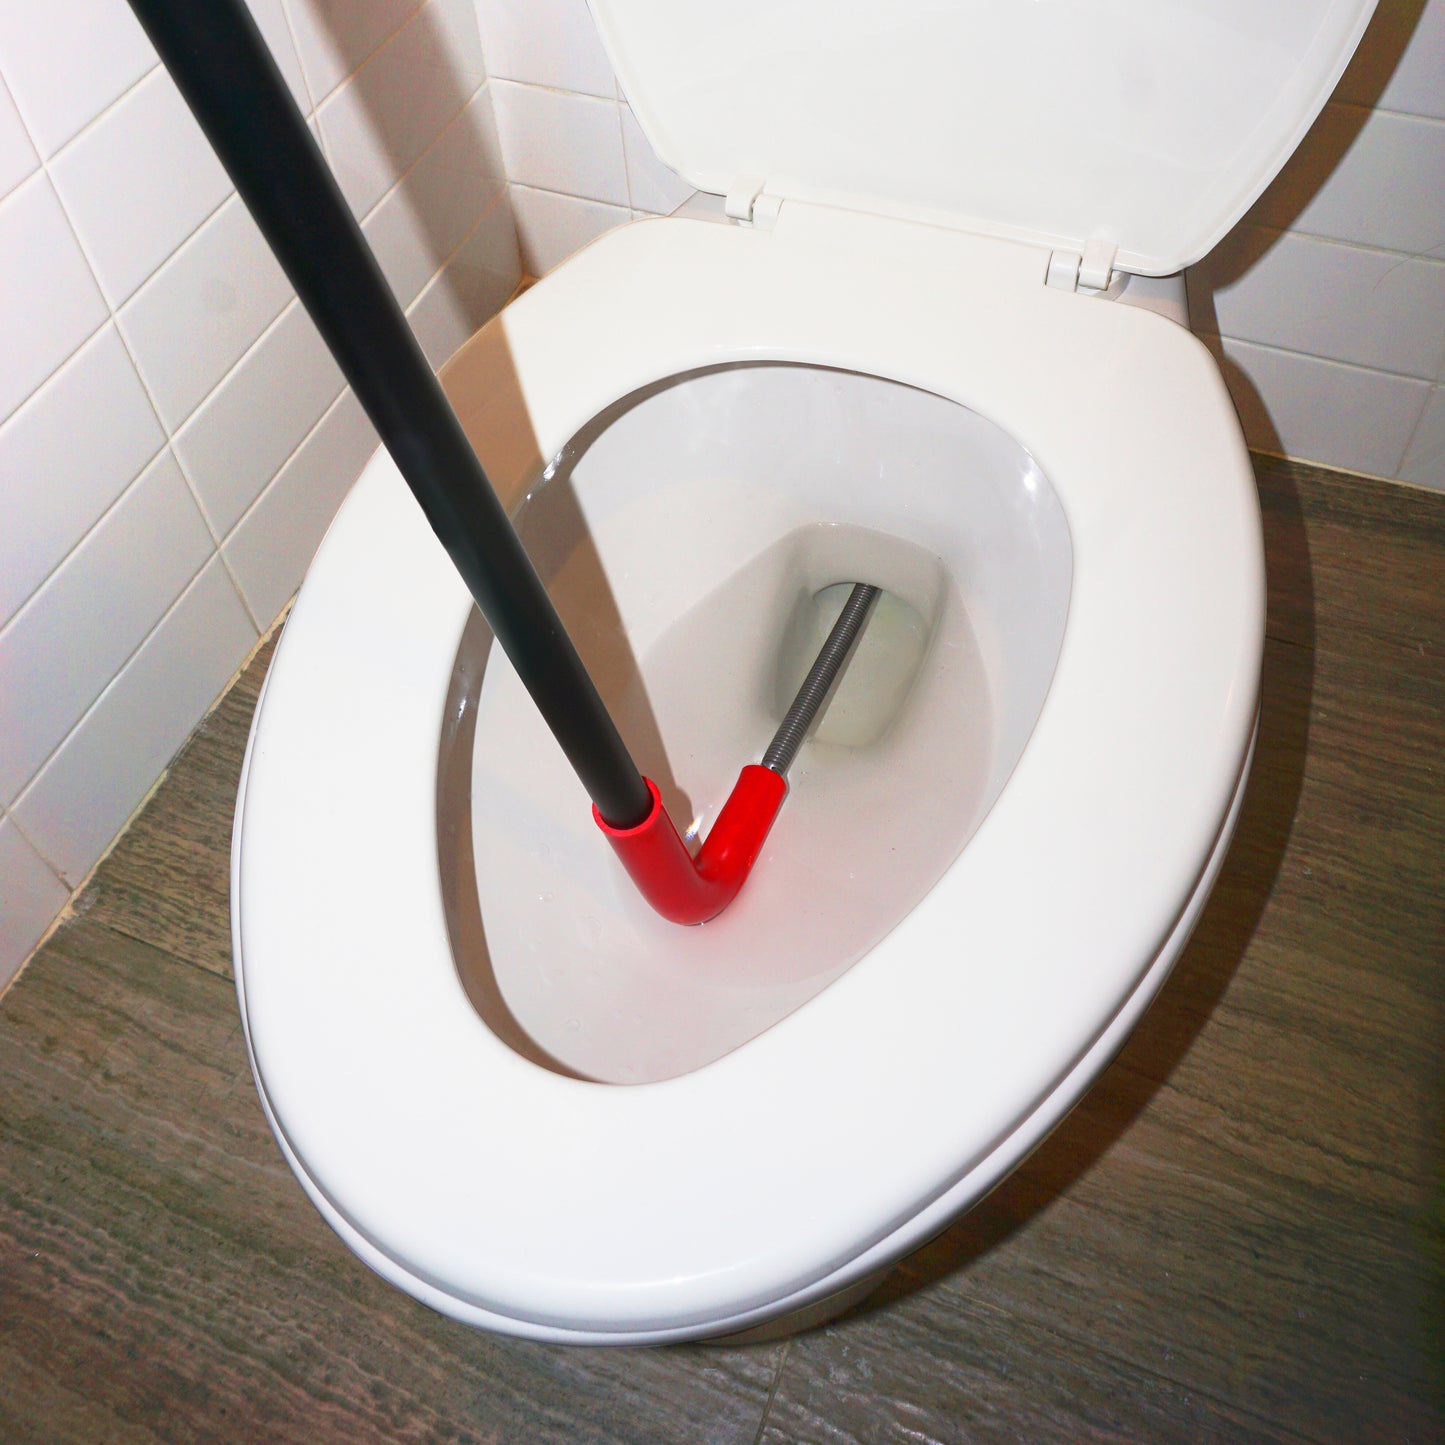 6FT Toilet Auger with Heavy Duty Drophead | Use with Drill or Manually